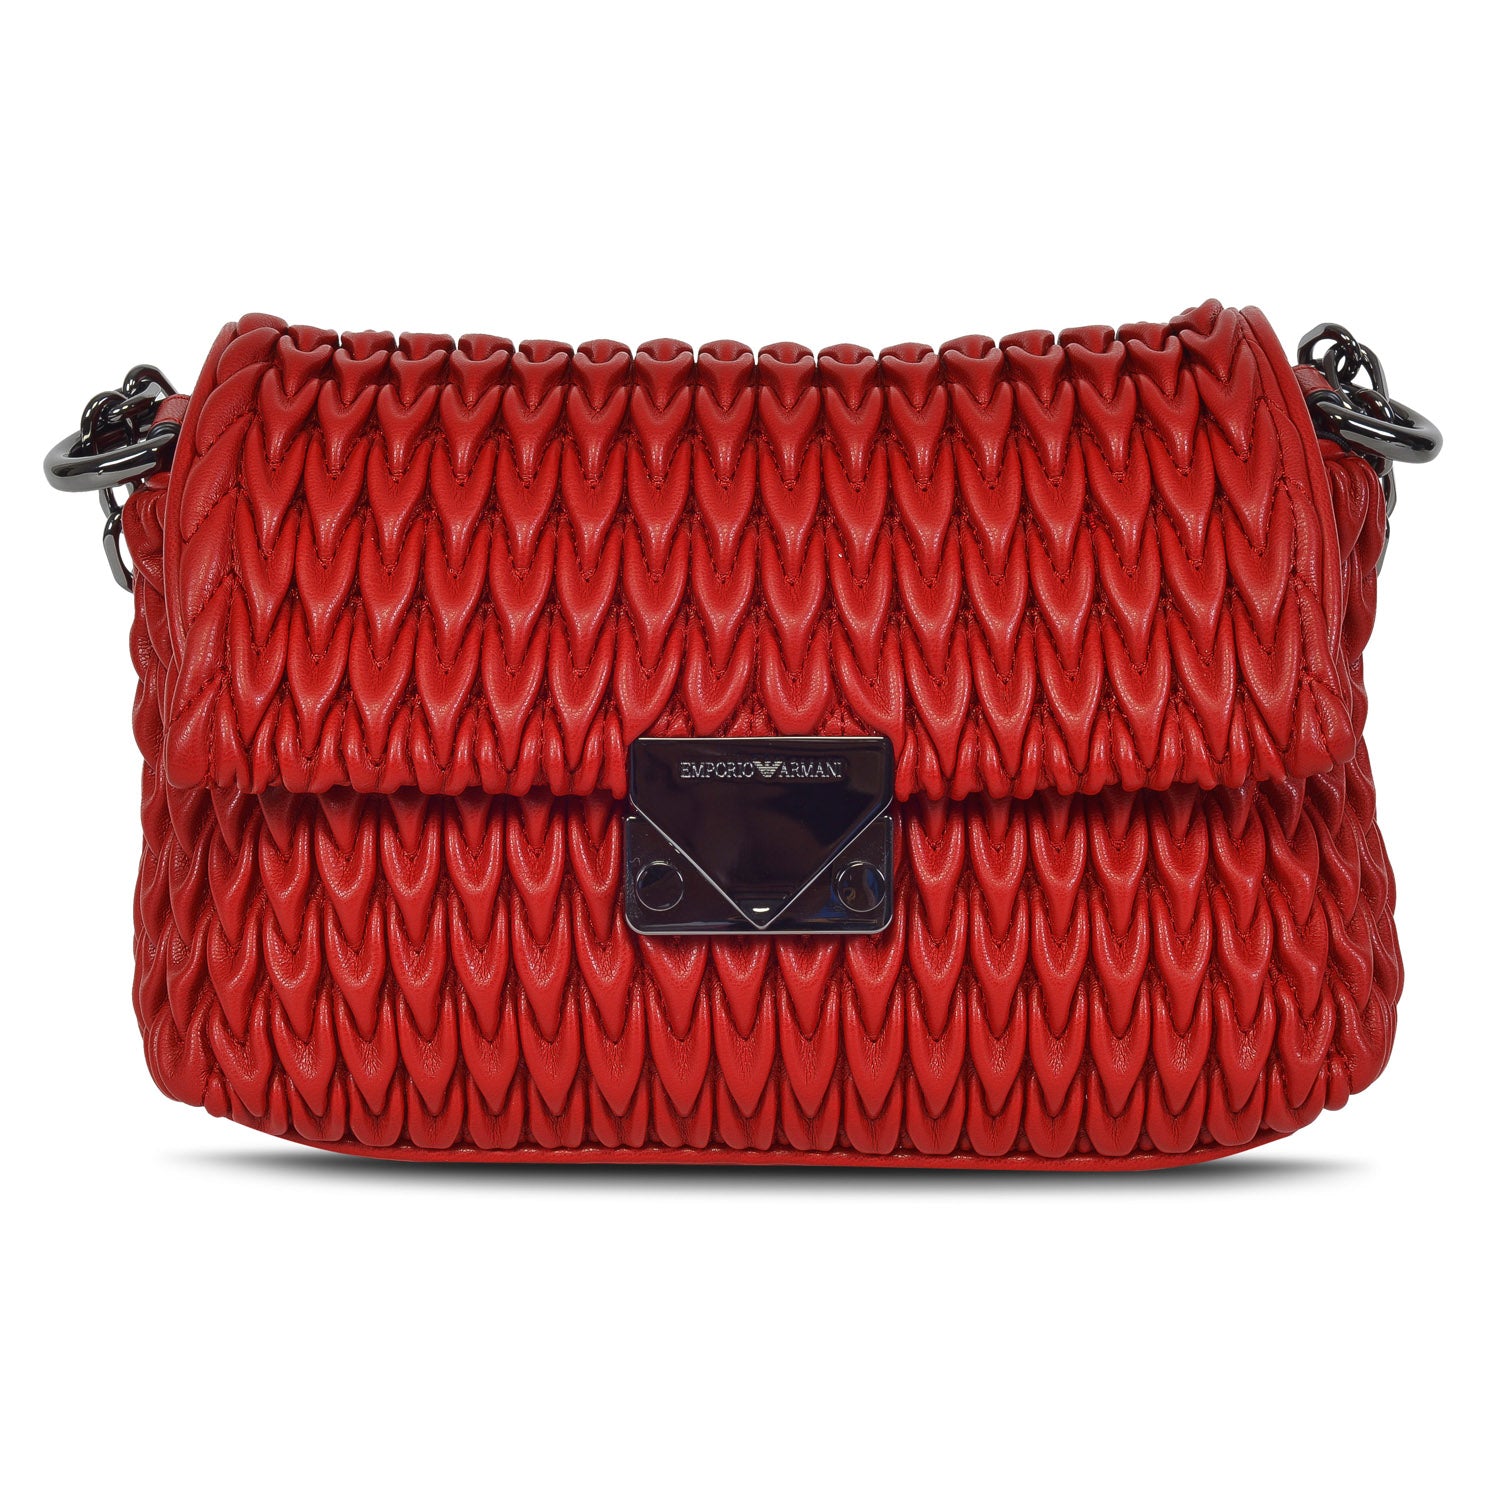 armani quilted bag